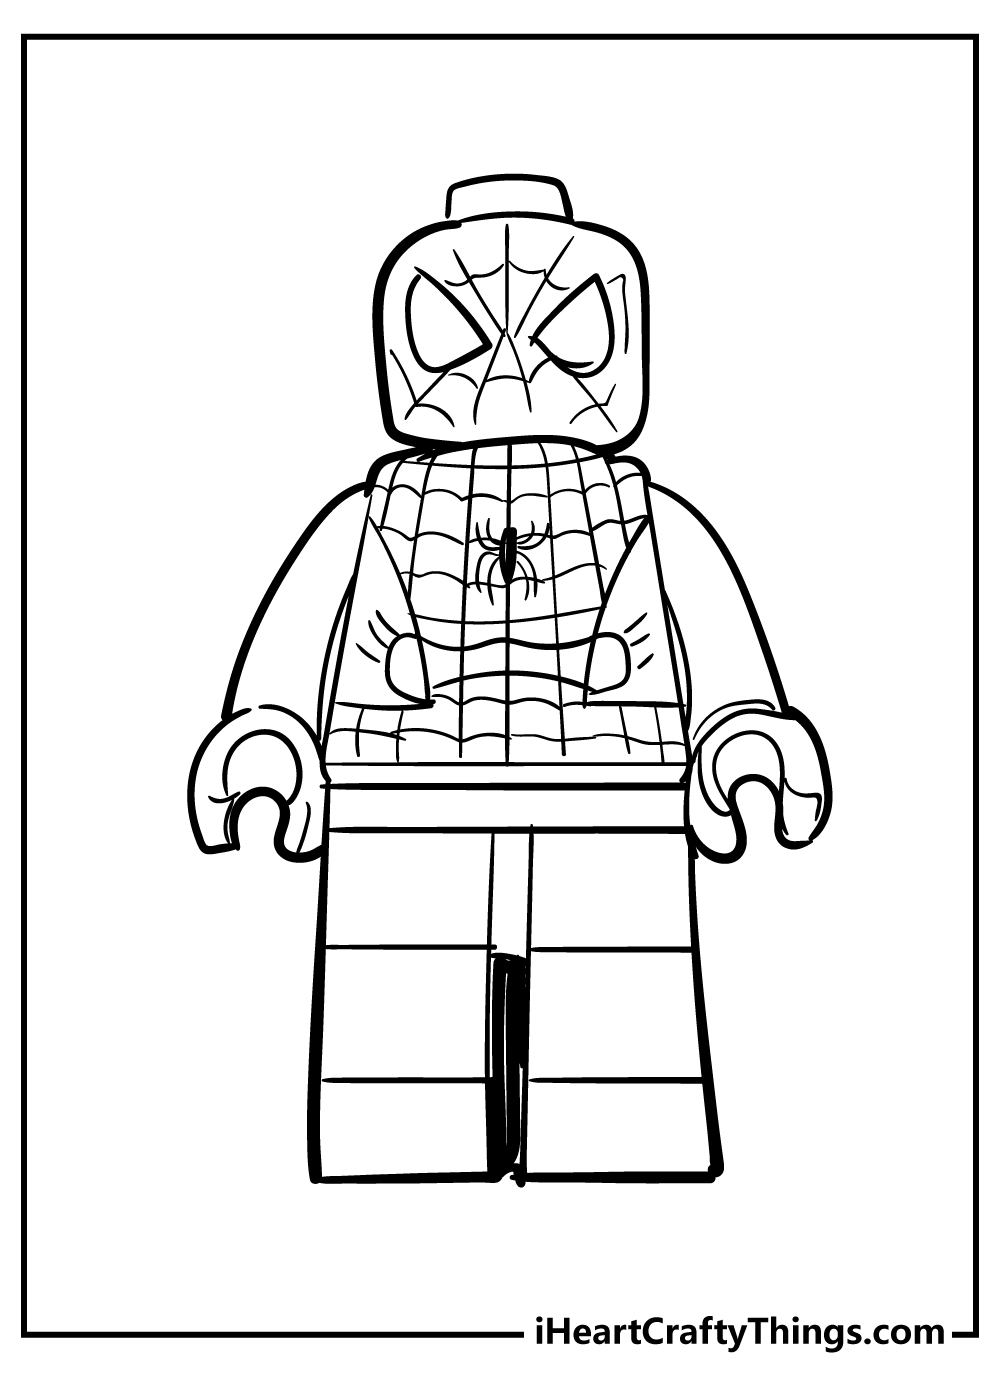 Printable Lego Avengers Coloring Pages Updated 21